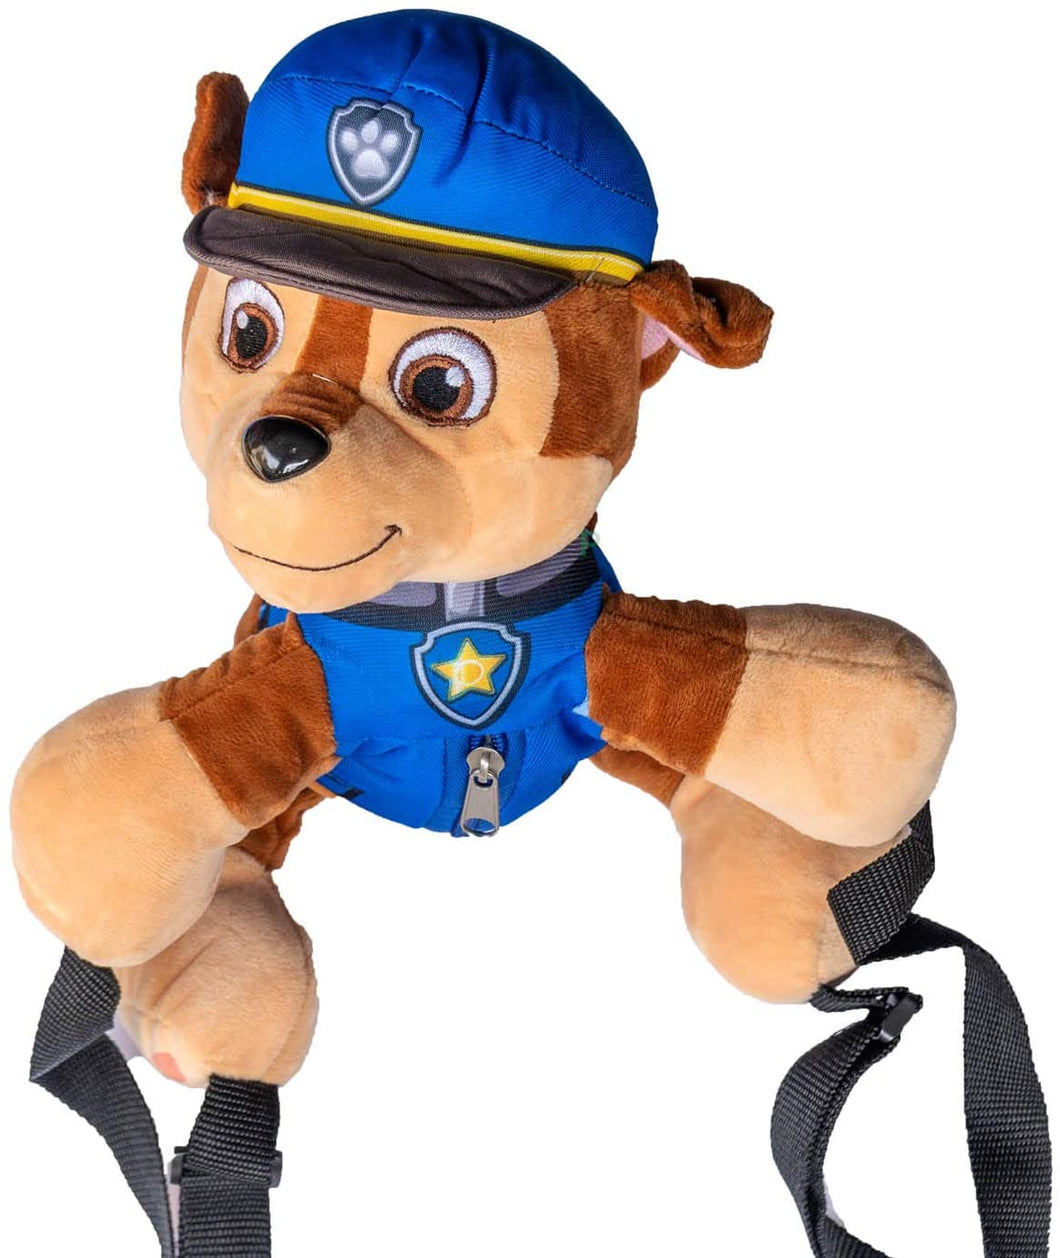 Paw Patrol Plush Backpack Toddler Toy Cute Puppy Cuddly Puppets